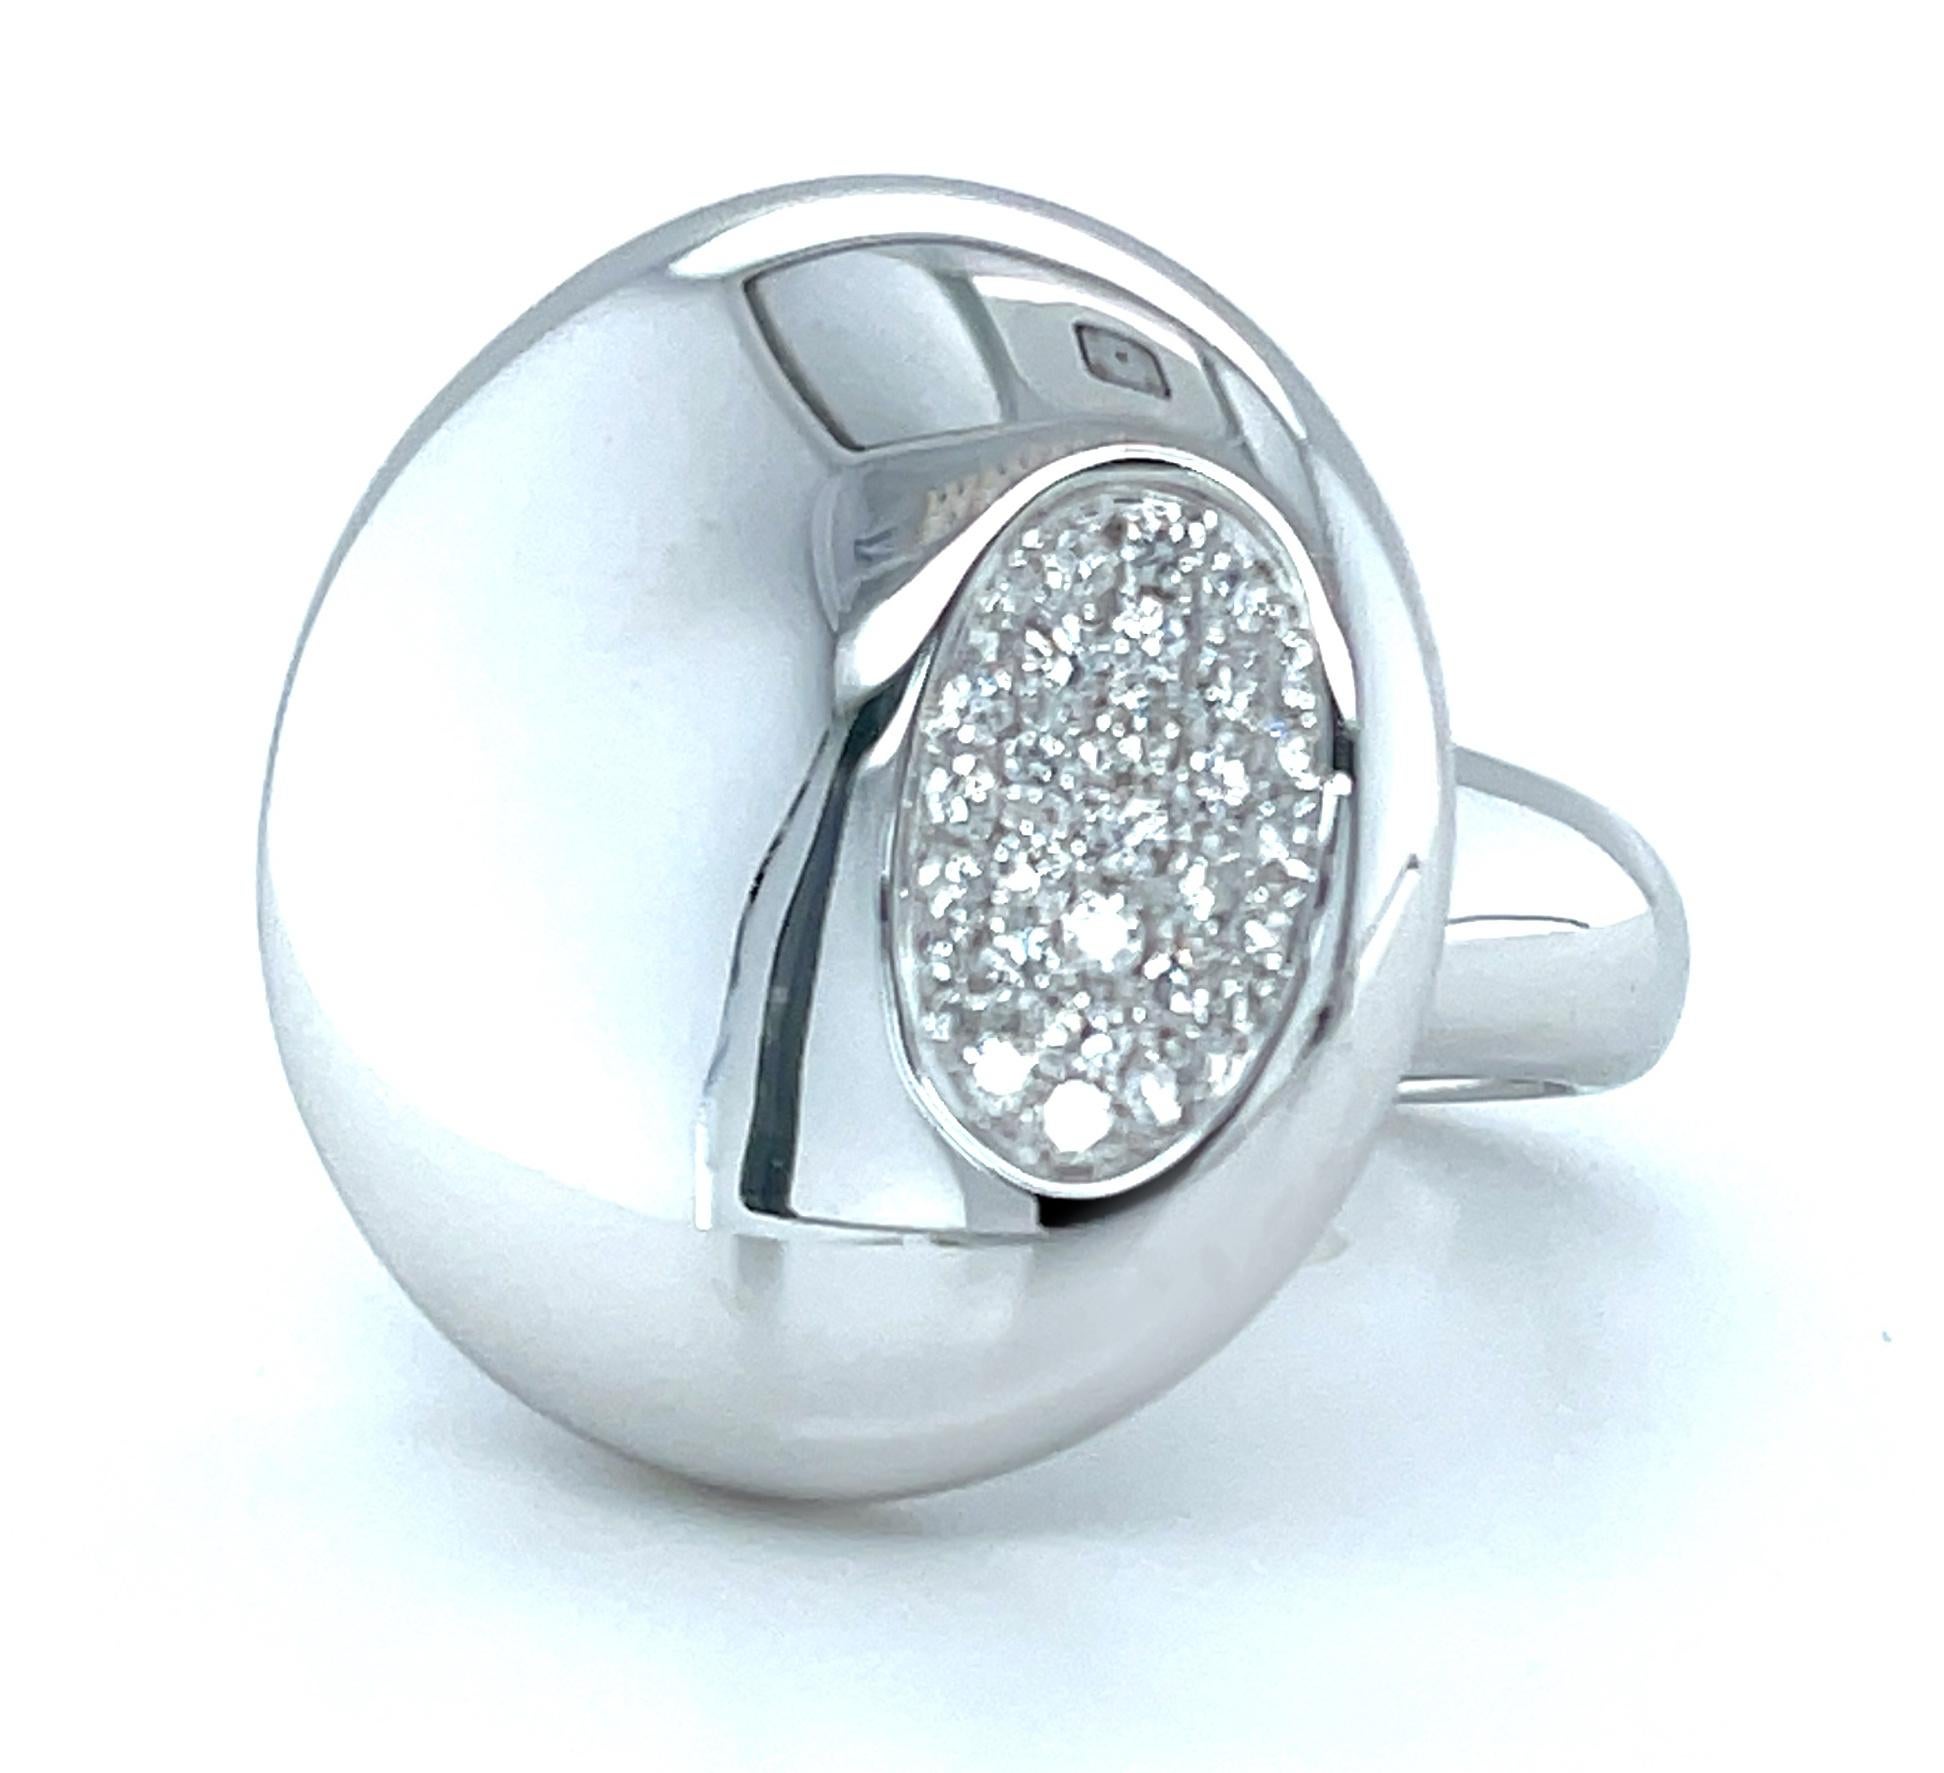 Show off your bold sense of style with this chic, diamond-studded 18k white gold ring! The beautifully high-polished dome looks fabulous worn on any finger and the sea of diamonds embedded in the oval concave give the ring a cool look that can't be